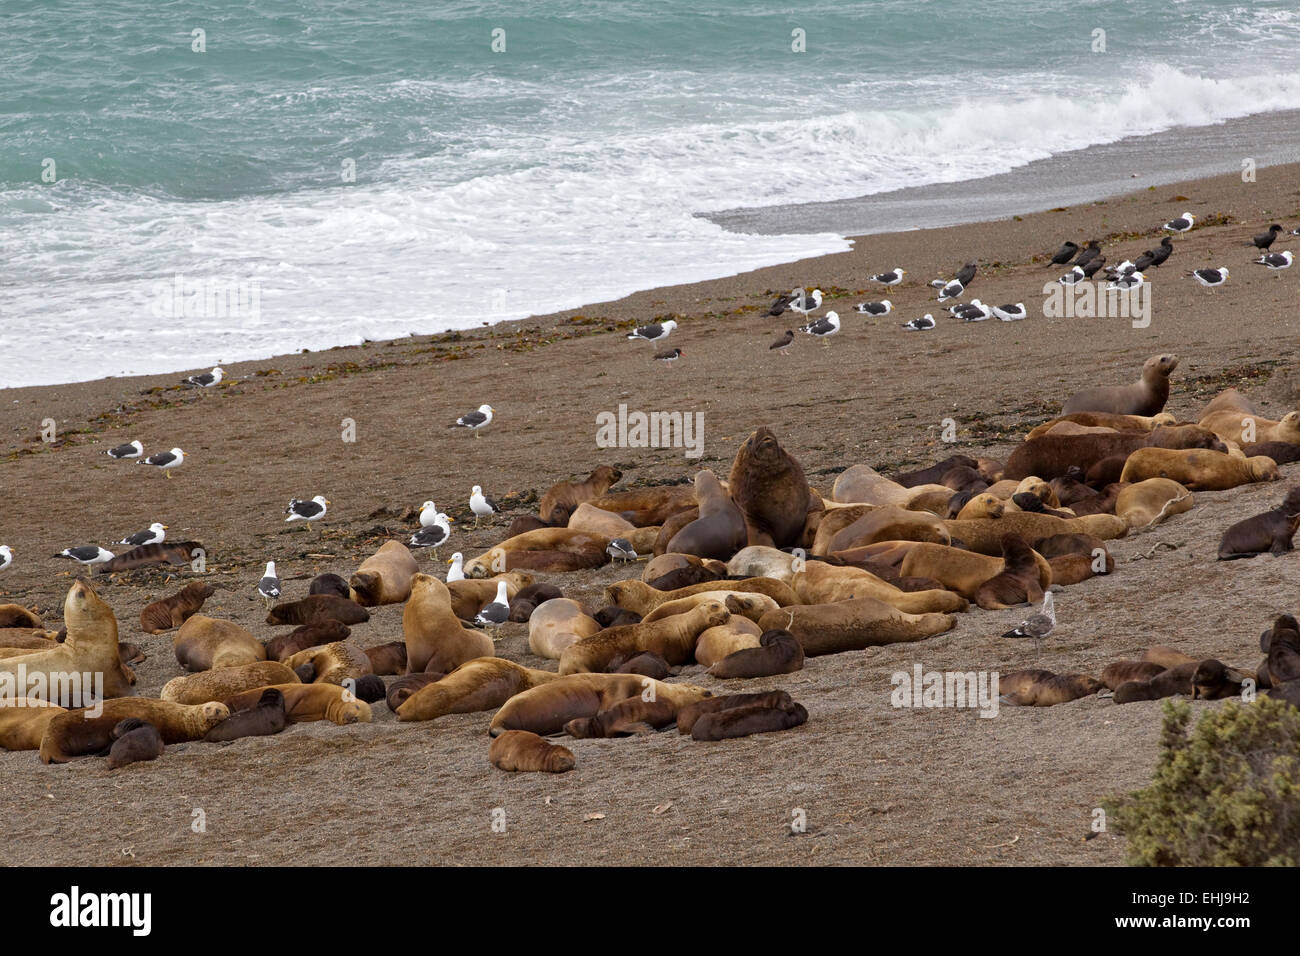 South American sea lions (Otaria flavescens) hauled out on beach of Punta Norte, Peninsula Valdes, Patagonia, Argentina Stock Photo